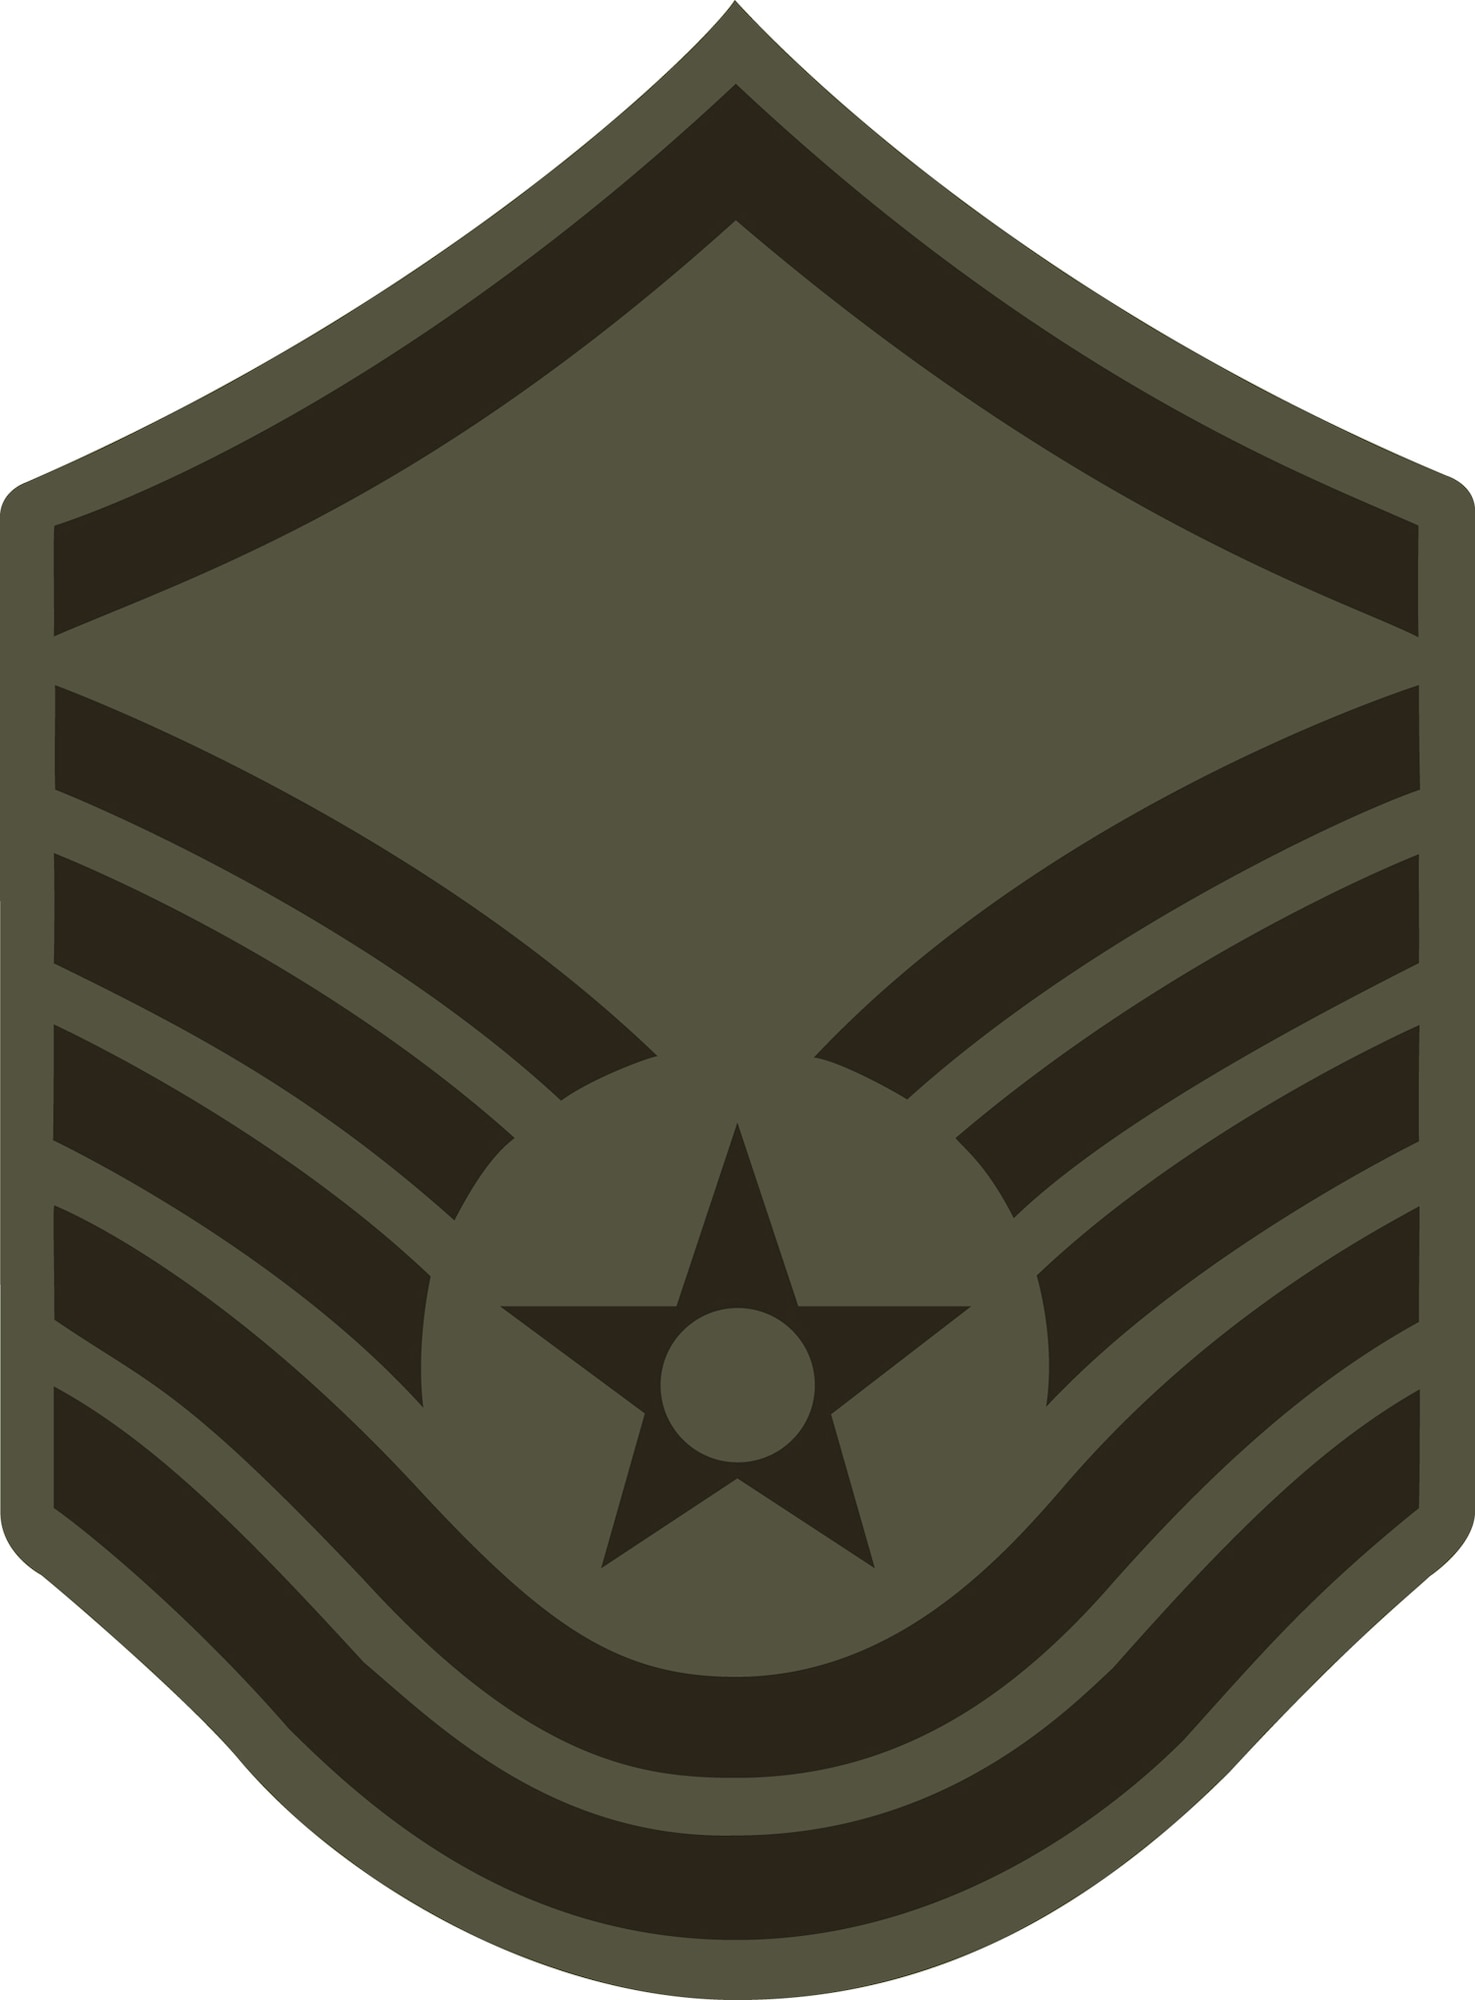 Air Force officials announced that 6,176 technical sergeants, 29.6 percent of eligible Airmen, were selected for promotion to master sergeant, May 23, 2018.